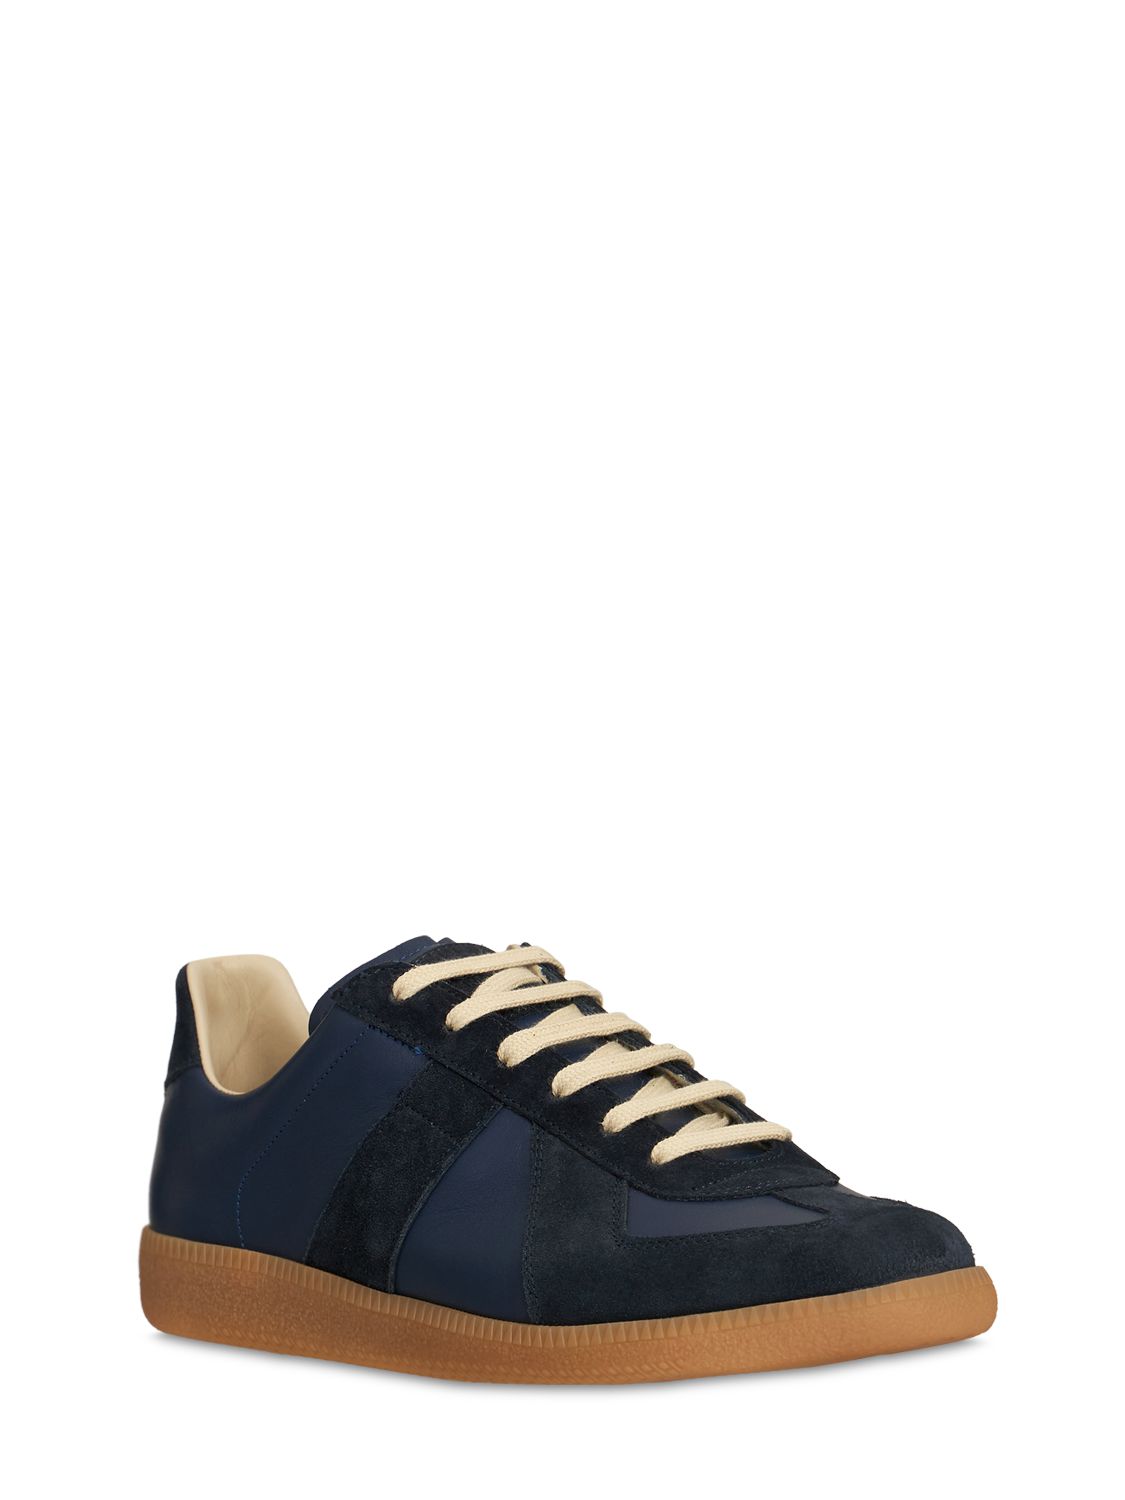 Shop Maison Margiela 20mm Replica Leather & Suede Sneakers In Navy